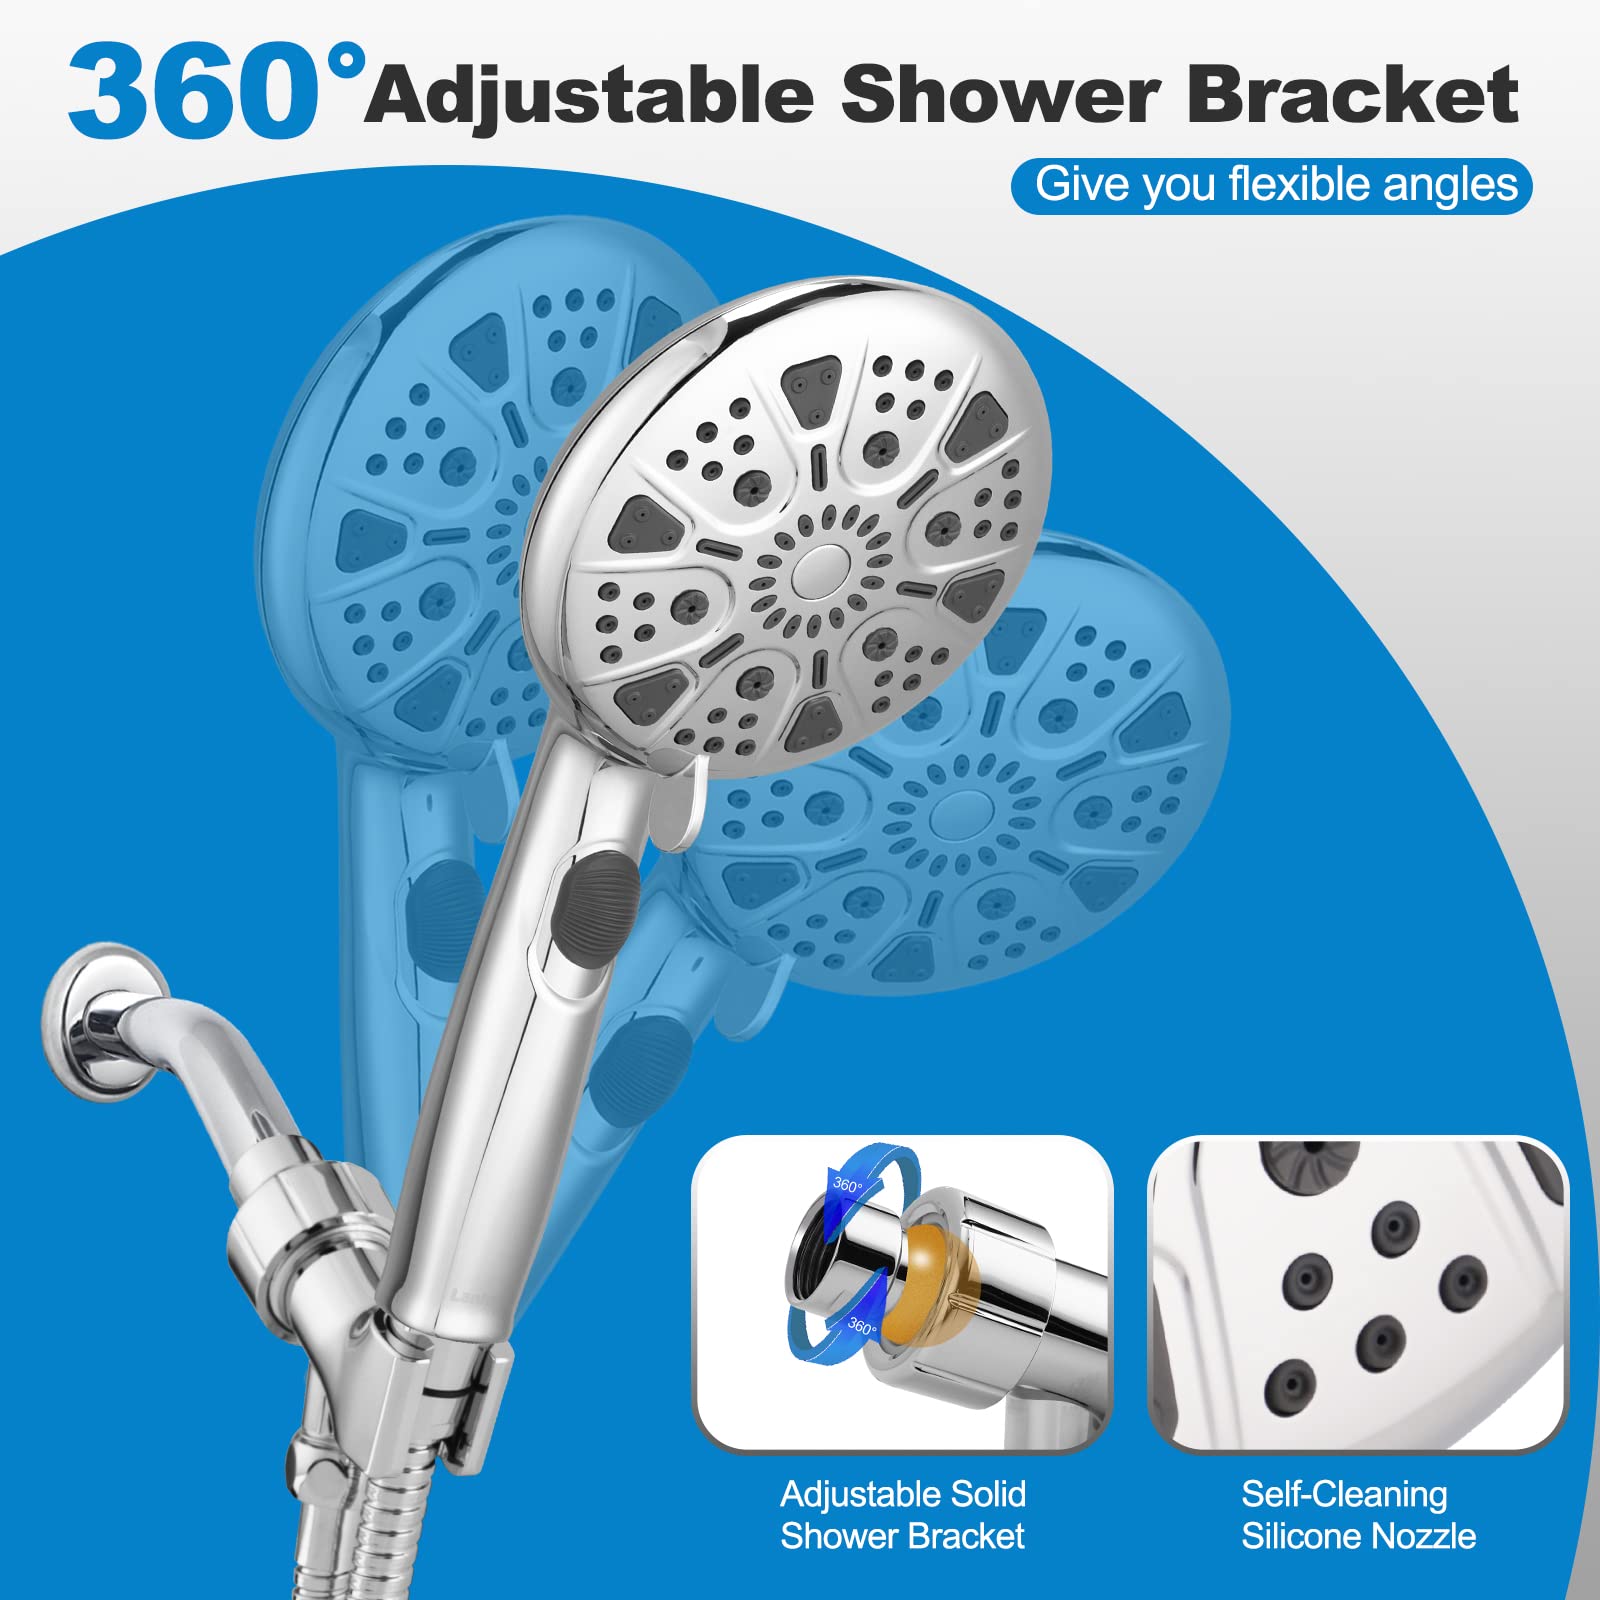 High Pressure Shower Head with handheld, Lanhado 9 Setting Handheld Shower Head with Hose & Adjustable Bracket, High Flow shower heads, Built-in Power Wash to Clean Tub, Tile & Pets, Chrome